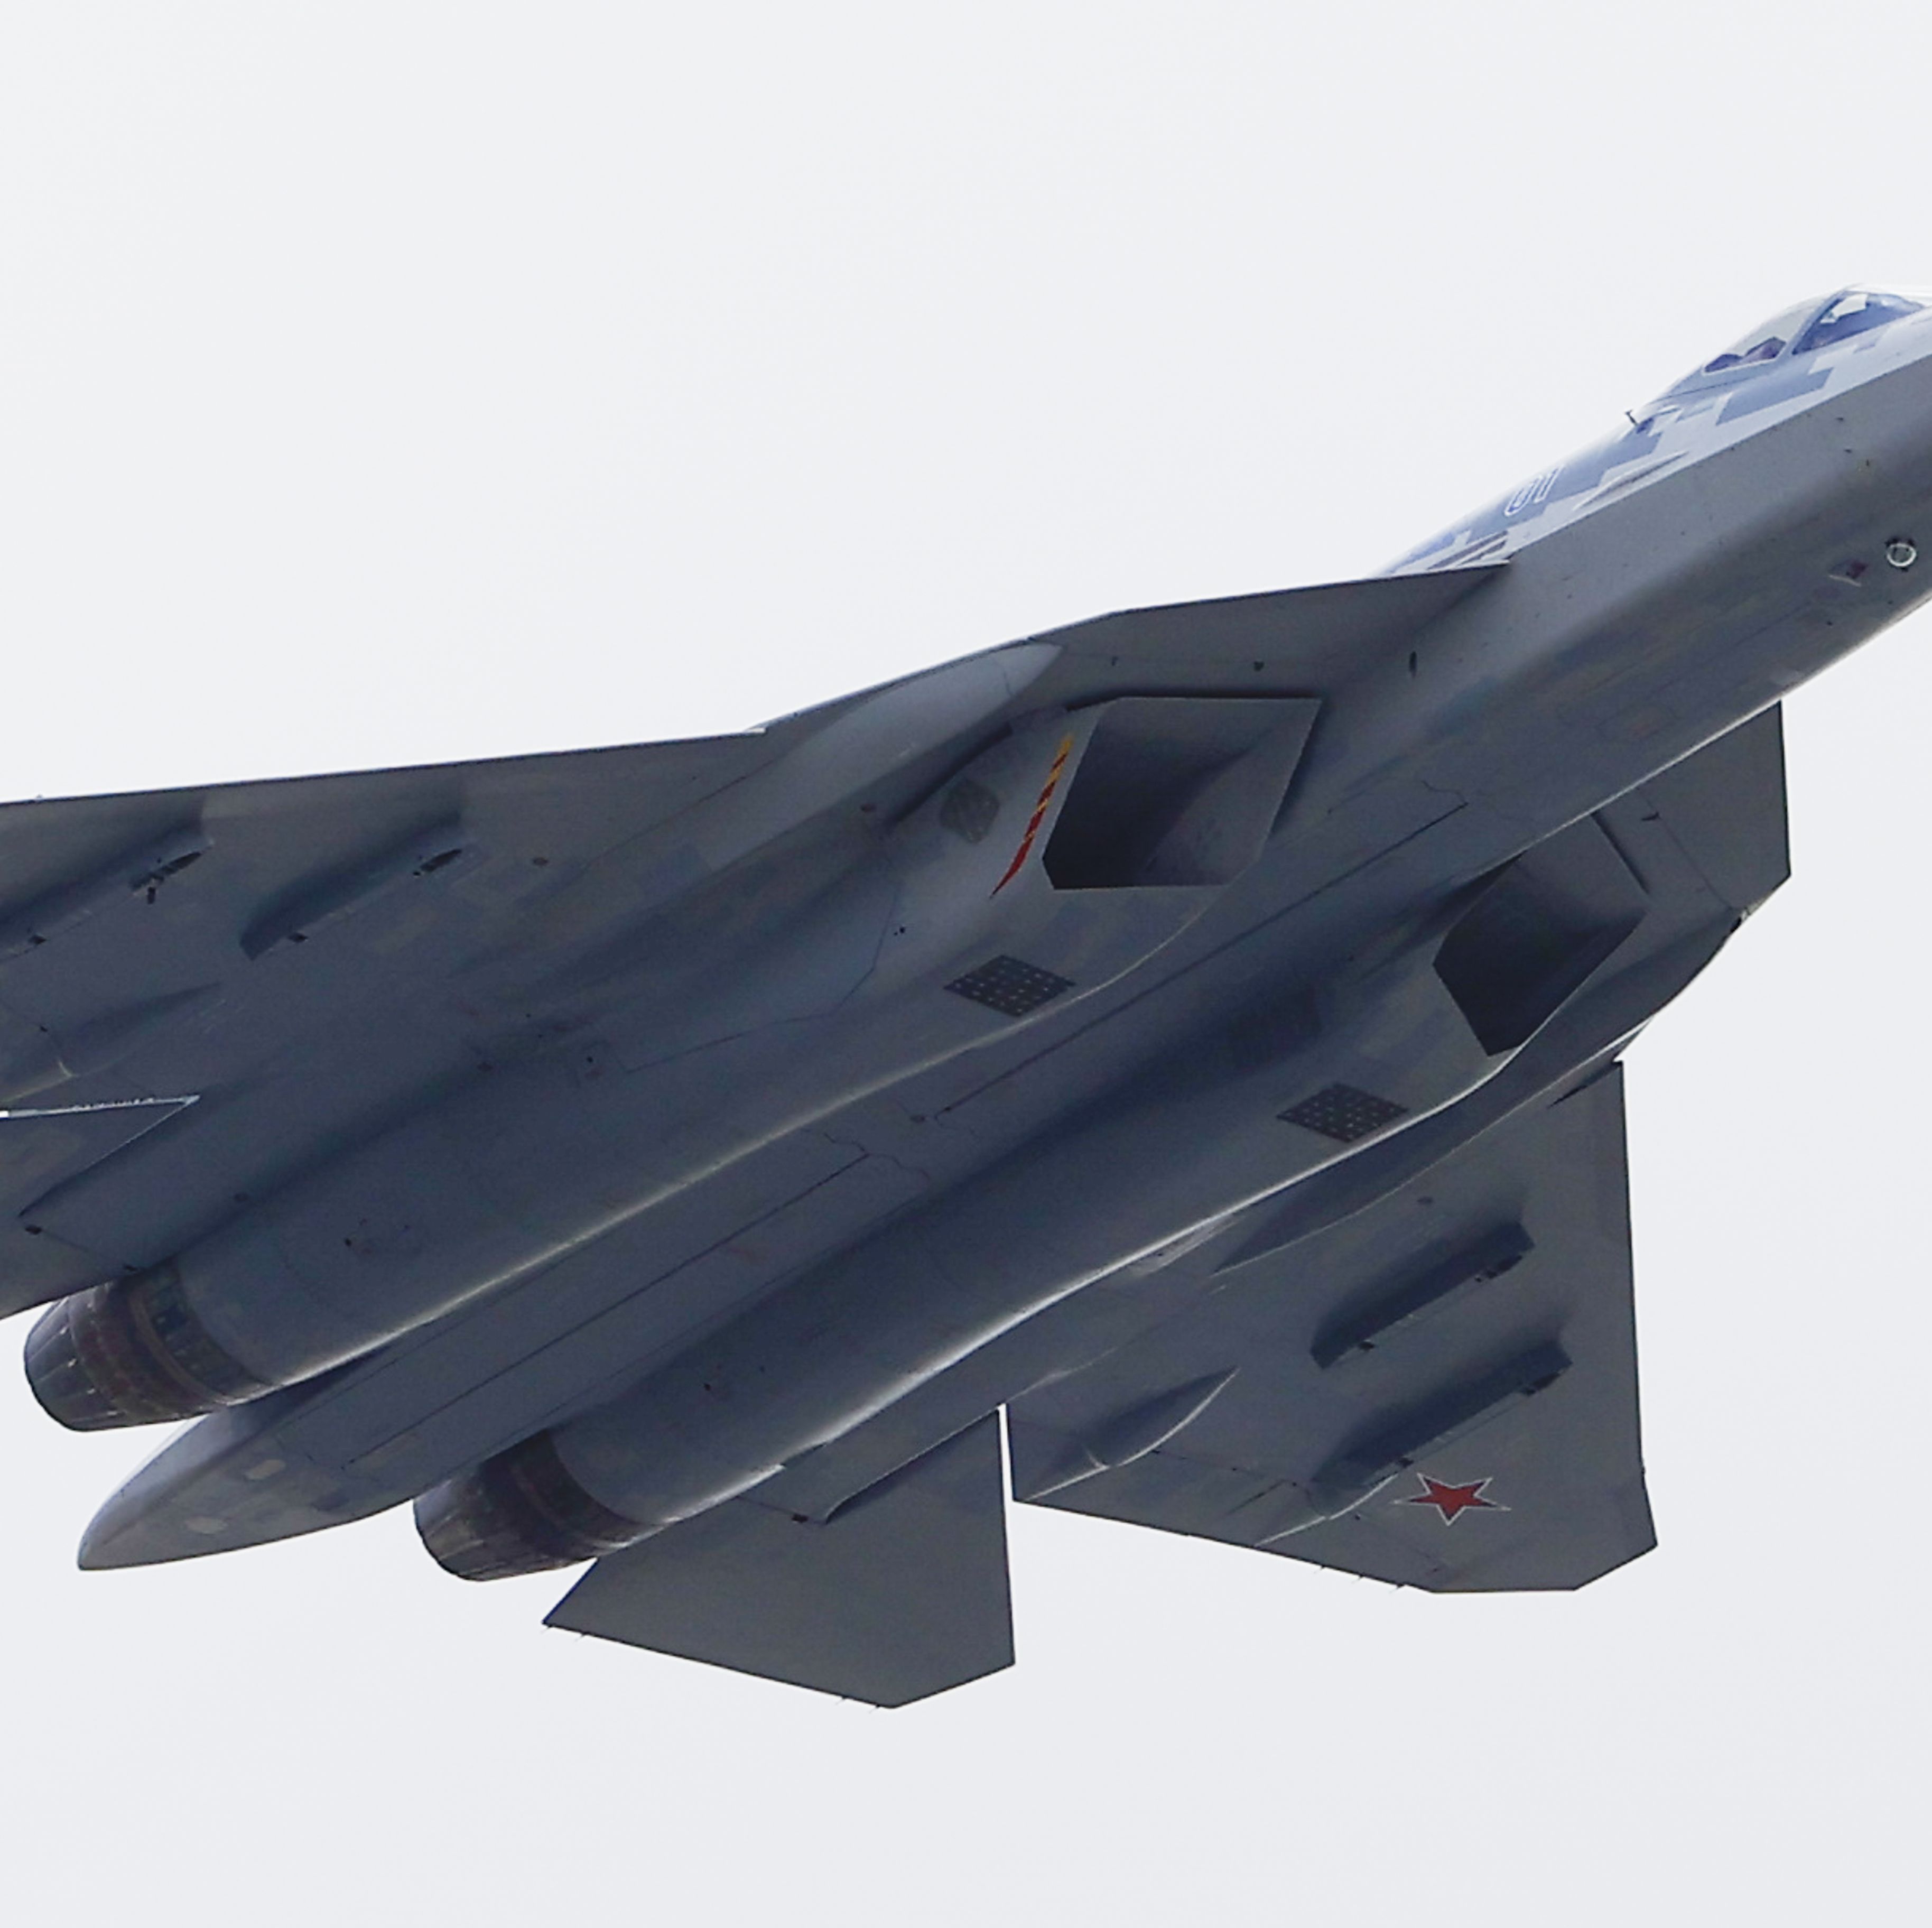 Russia Is Building a Single-Engine, 'Hypersonic' Fighter Jet